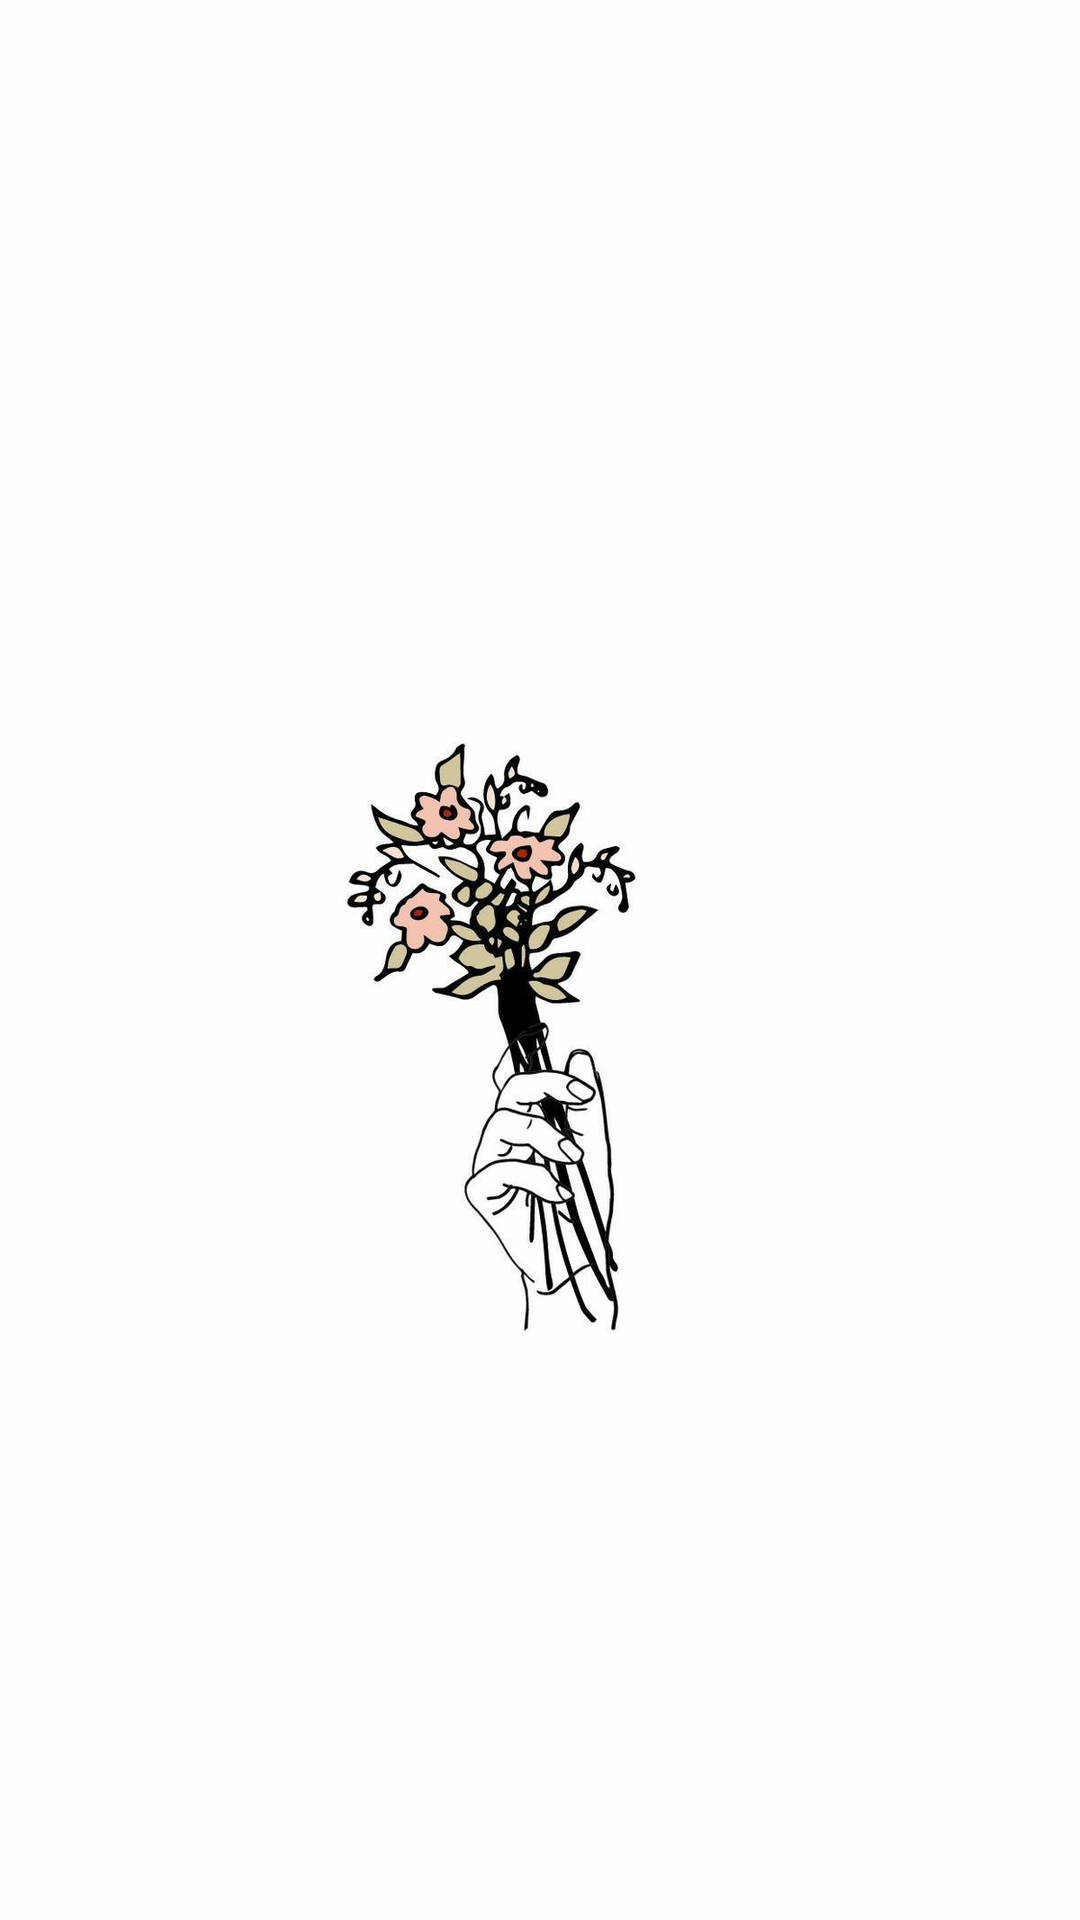 Hand Holding Flowers Aesthetic Sketches Background